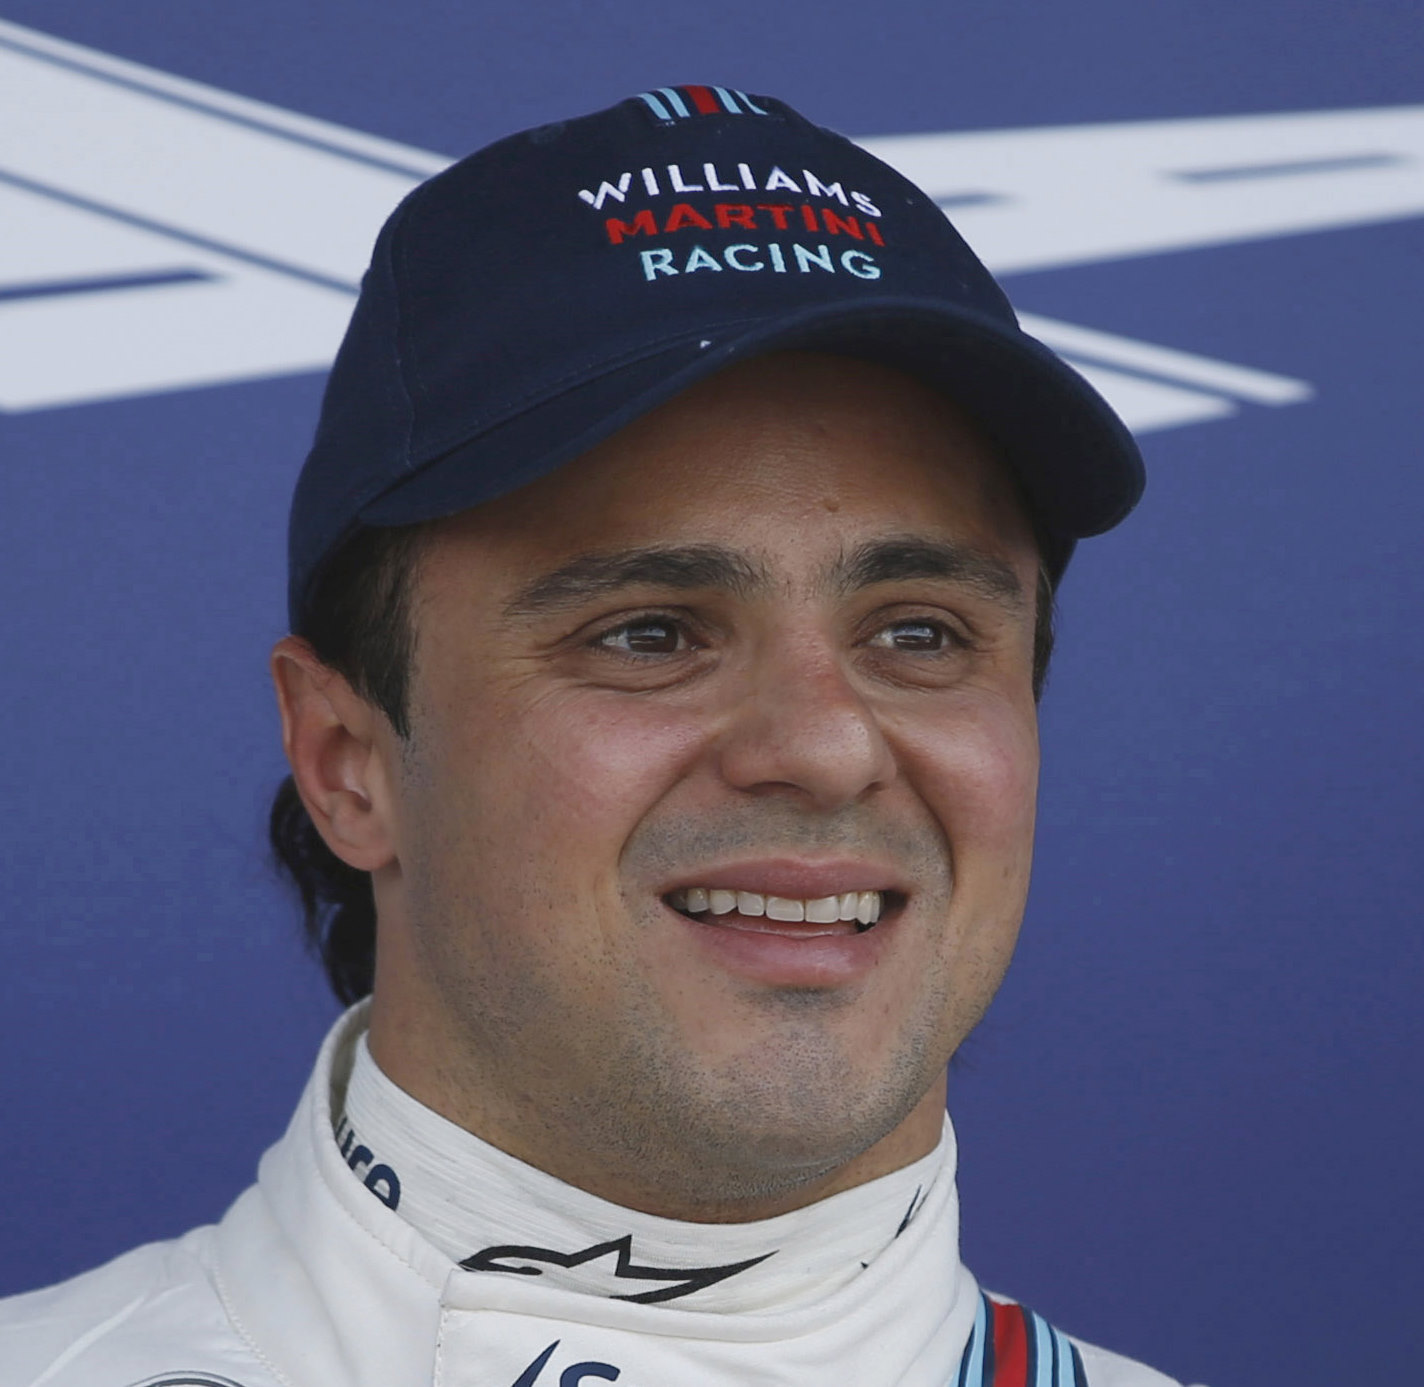 Massa's days appear numbered and he is afraid to drive an IndyCar